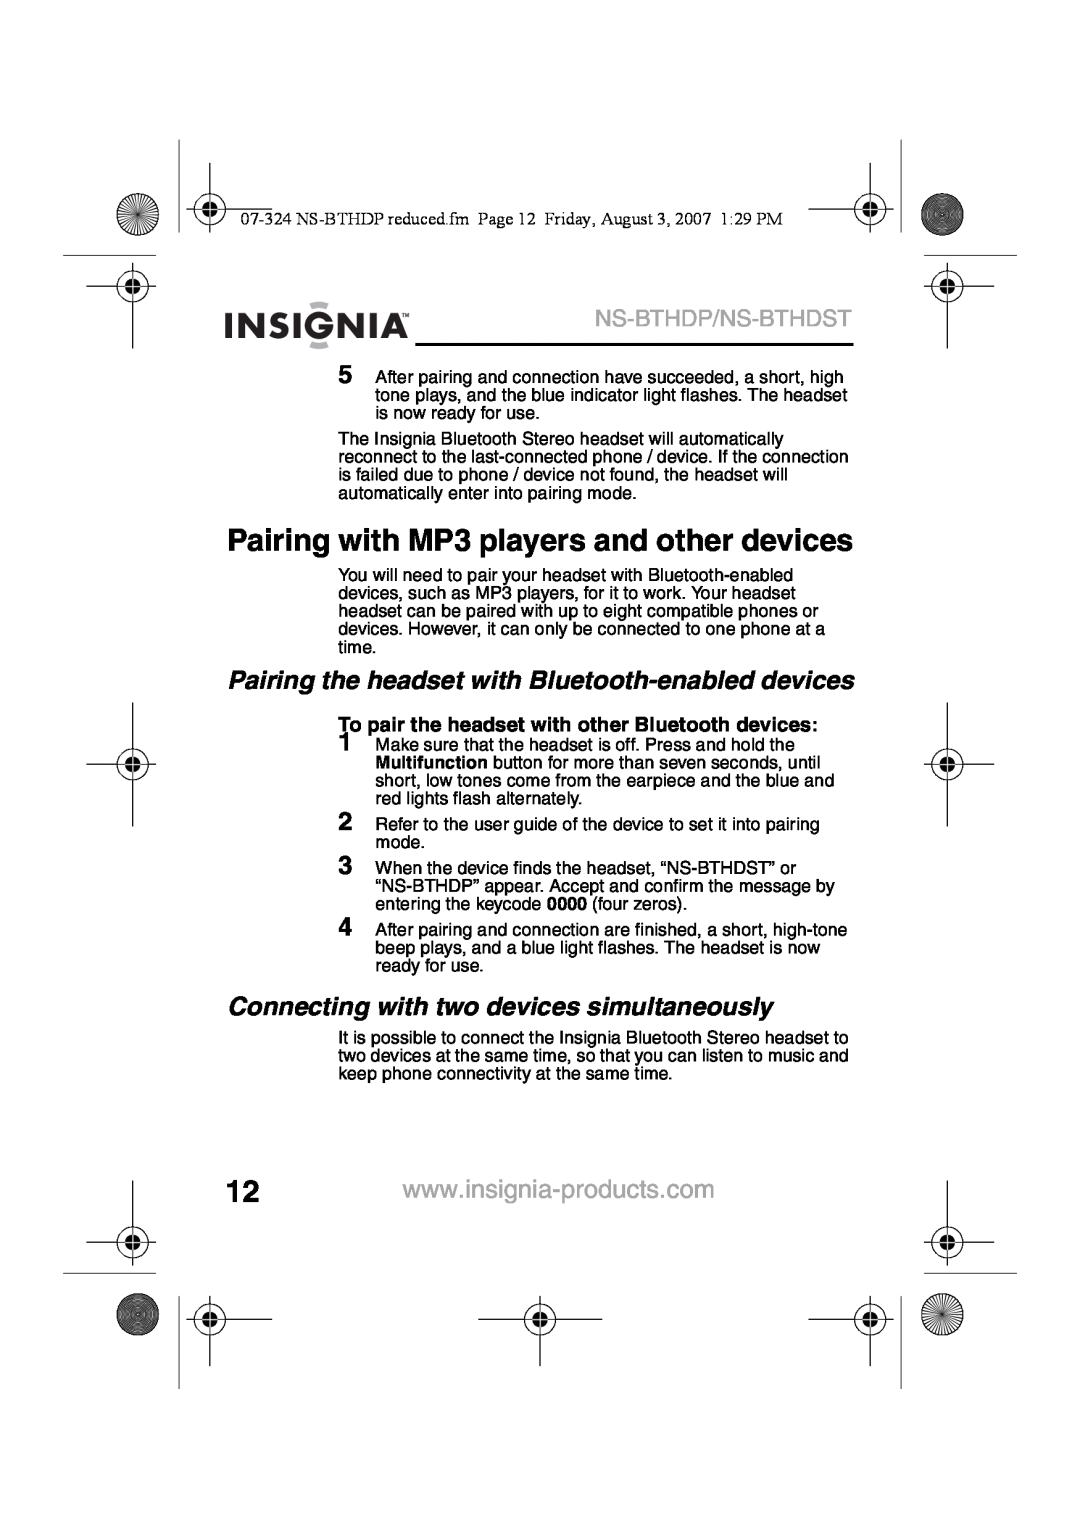 Insignia NS-BTHDST manual Pairing with MP3 players and other devices, Pairing the headset with Bluetooth-enableddevices 